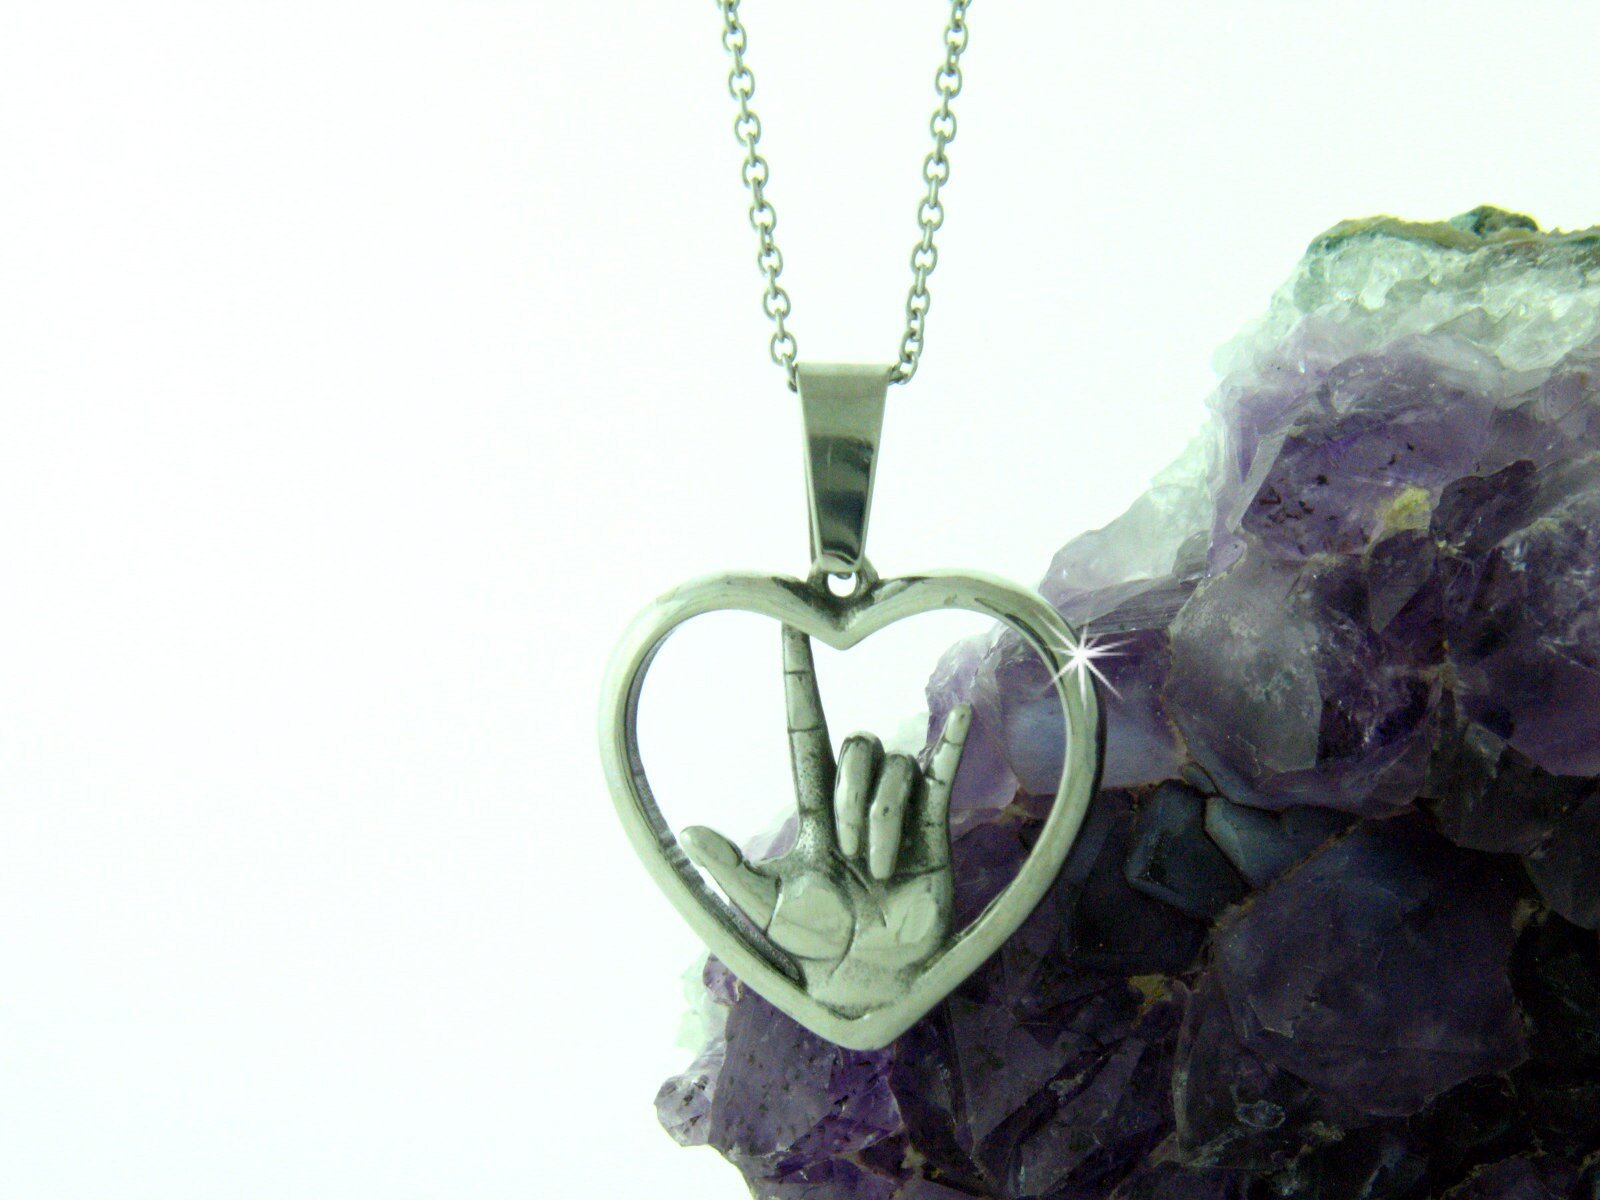 american sign language i love you heart necklacelarge or medium pendant s247 474415